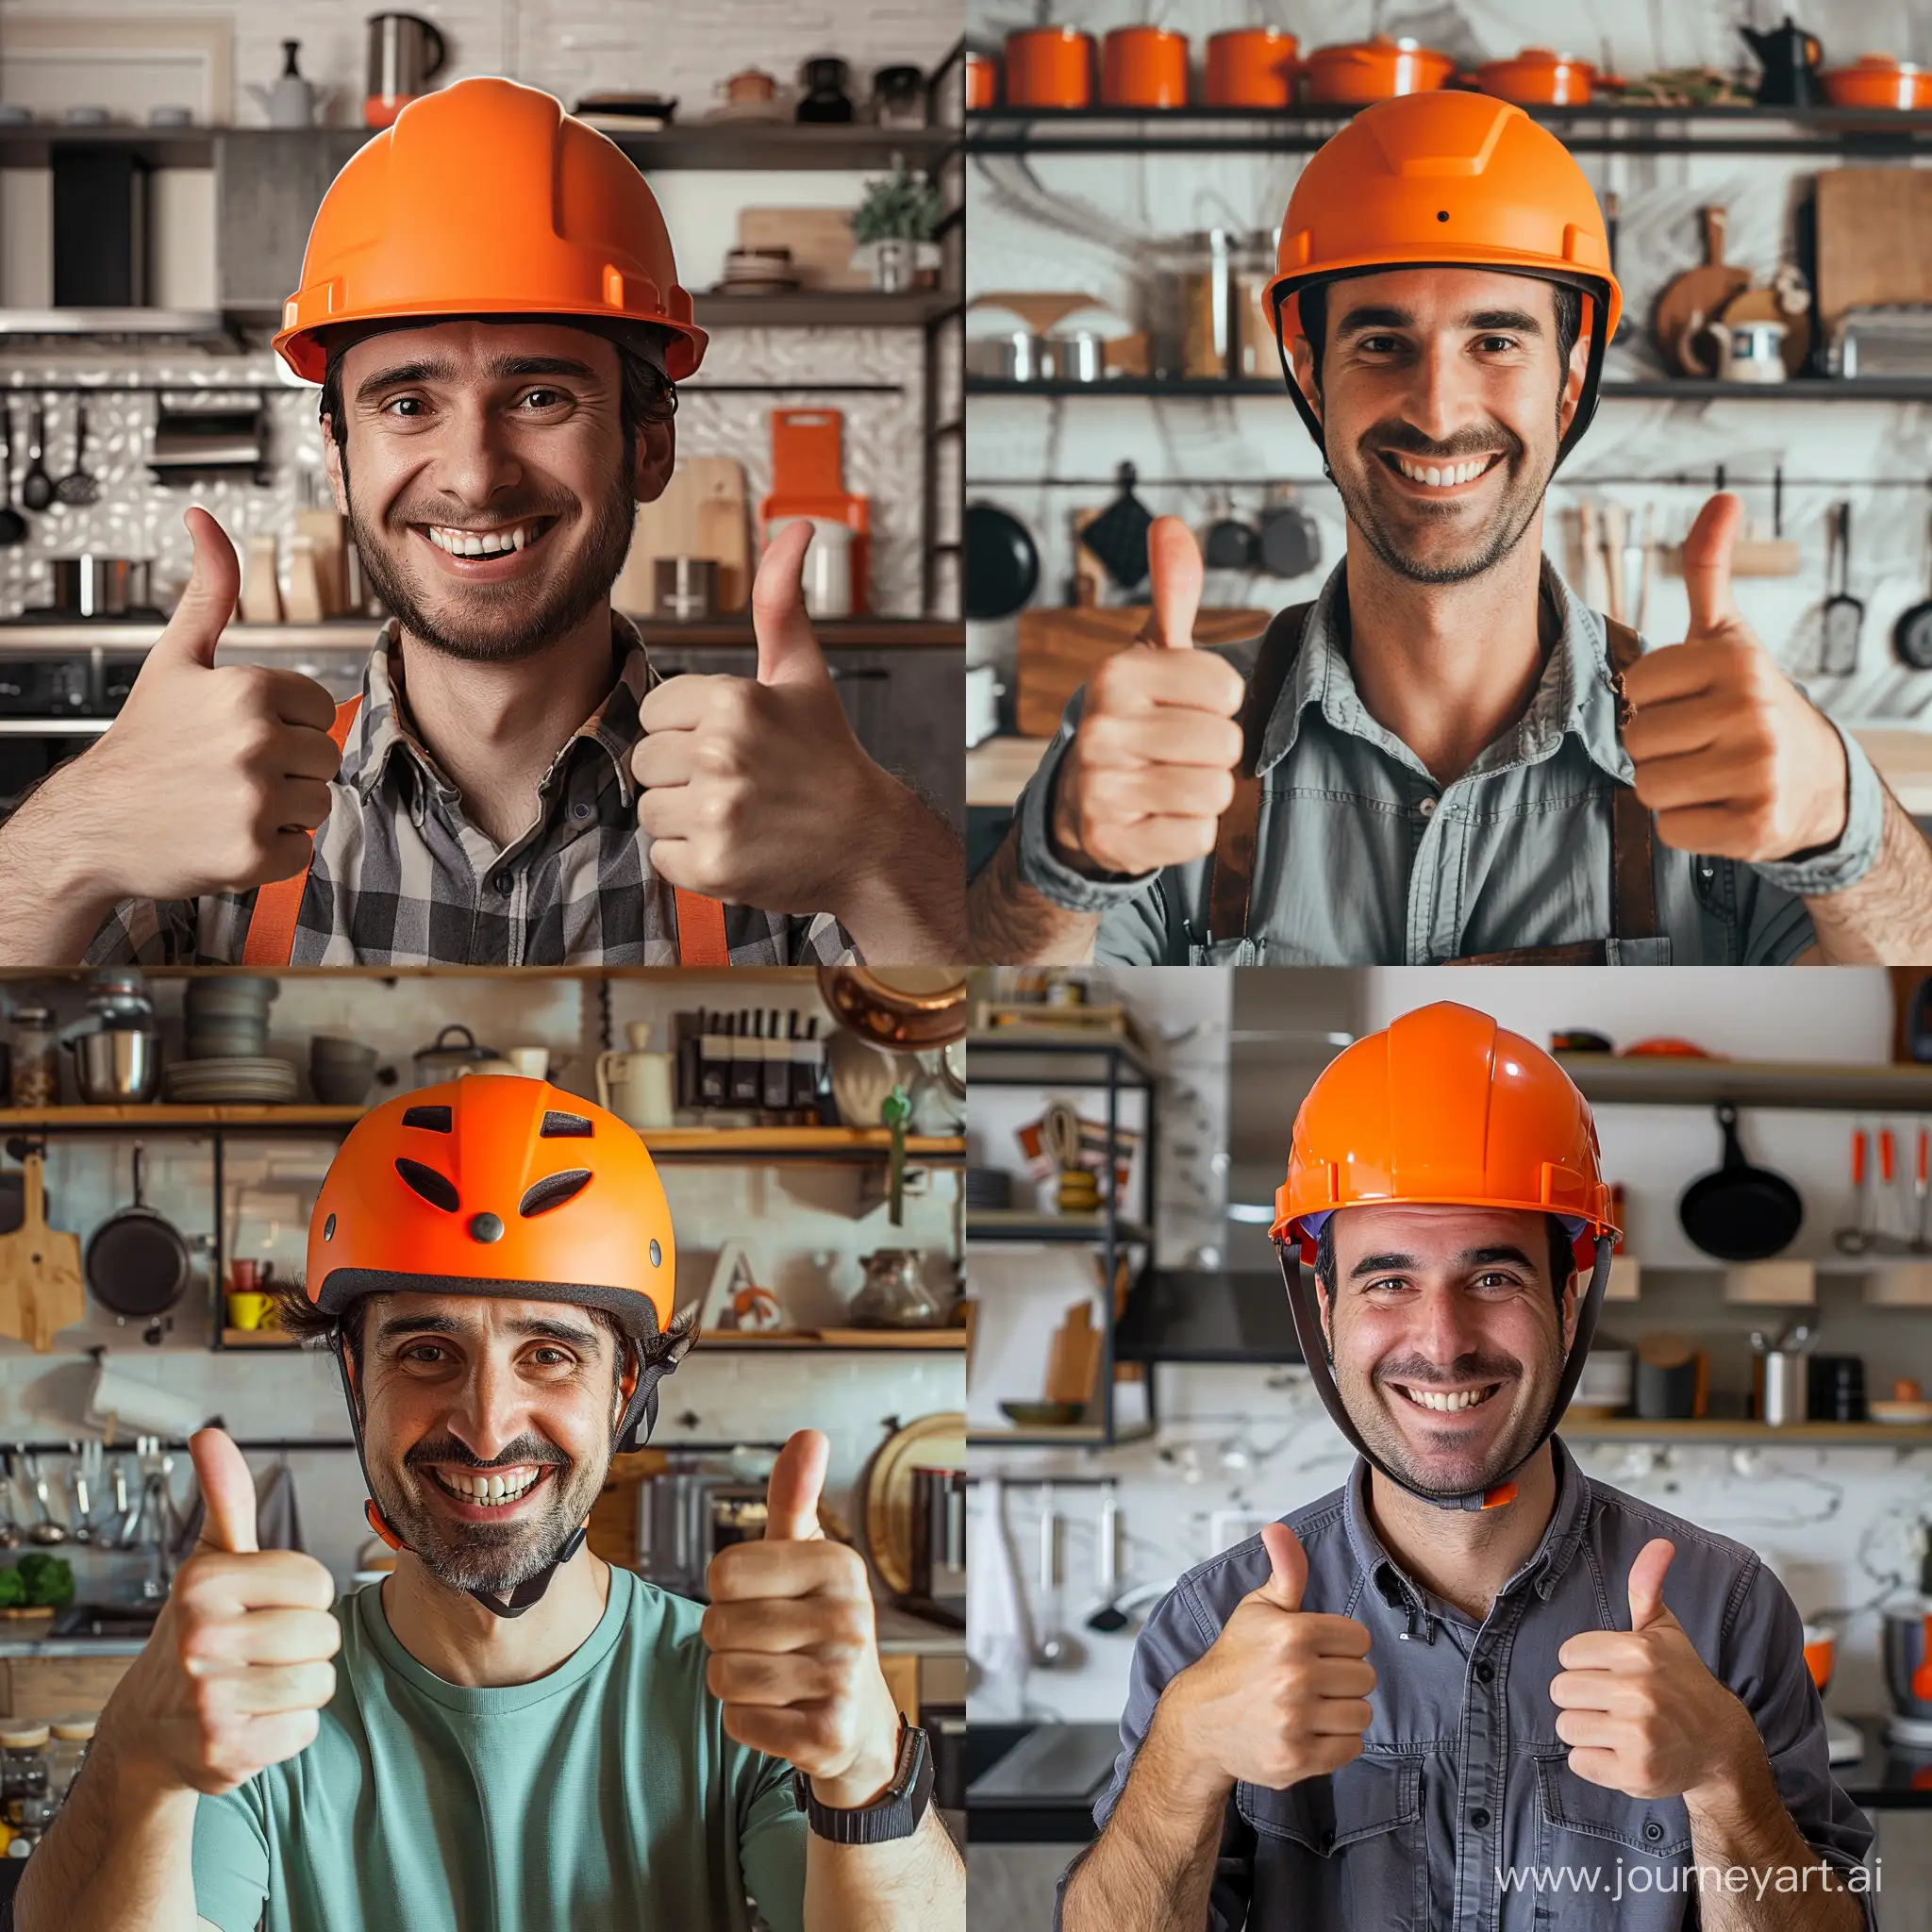 Smiling-Man-in-Orange-Helmet-with-Thumbs-Up-in-Kitchen-Setting